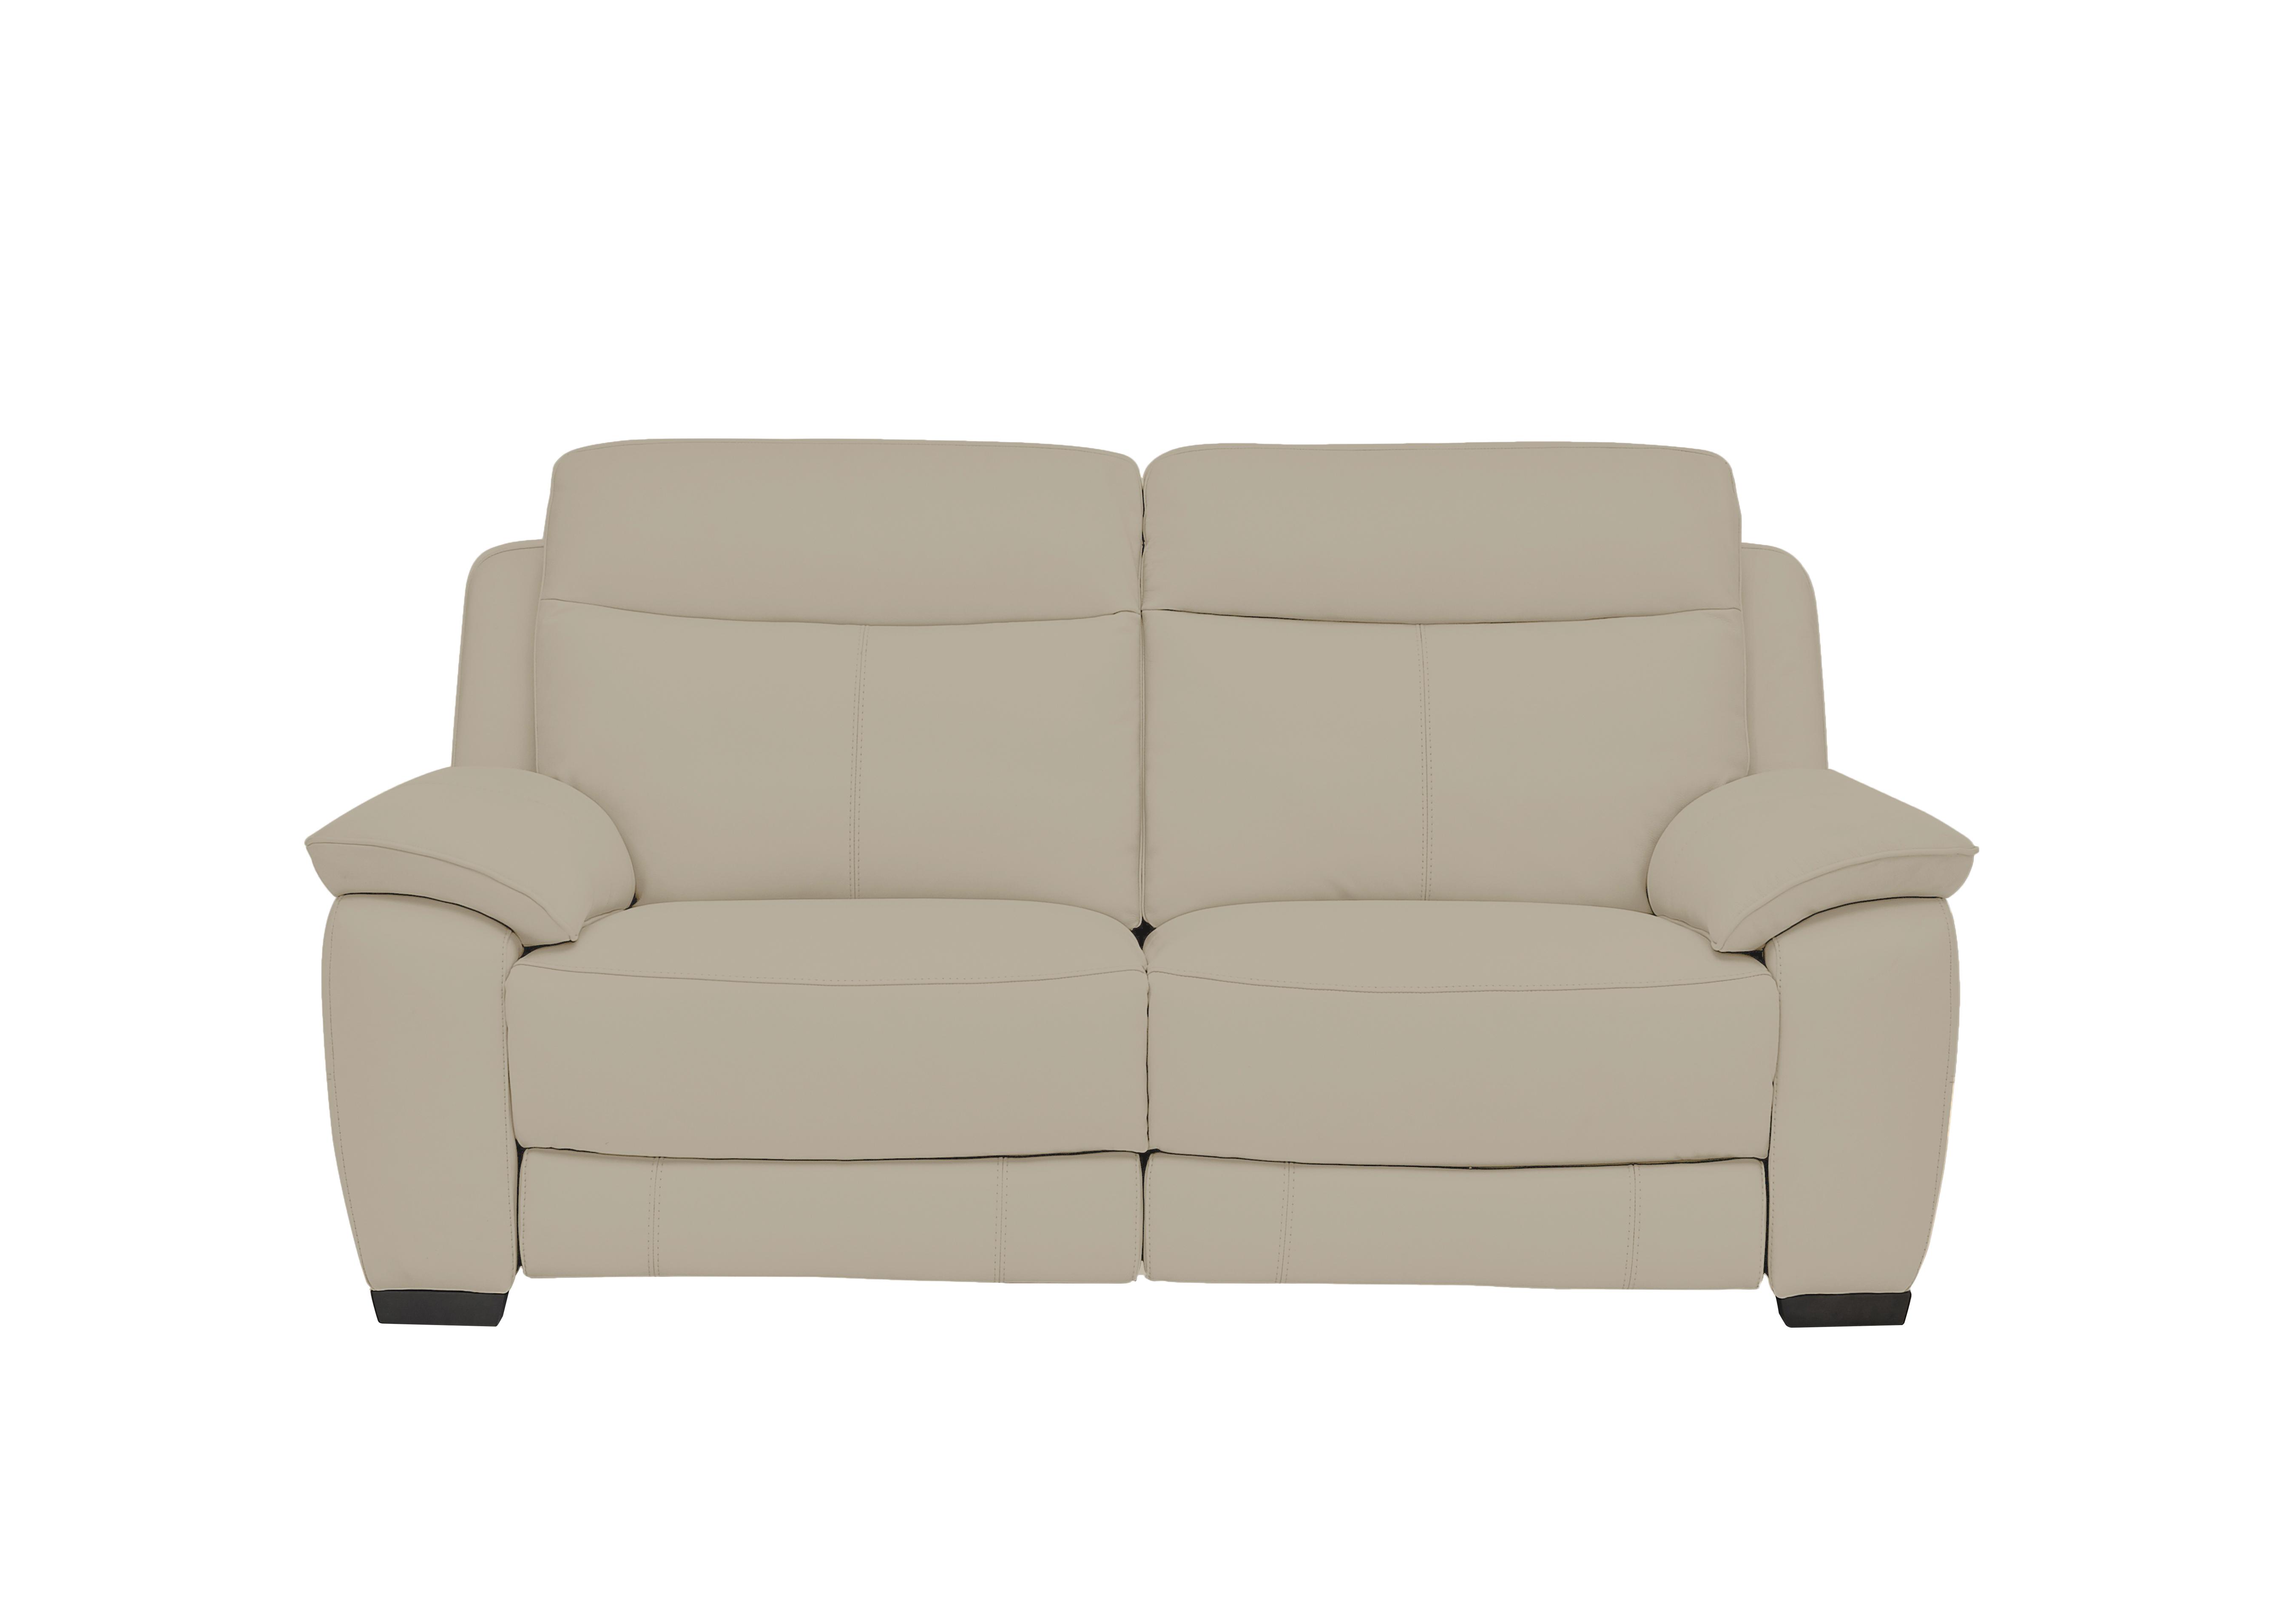 Starlight Express 2 Seater Leather Recliner Sofa with Power Headrests in Bv-041e Dapple Grey on Furniture Village